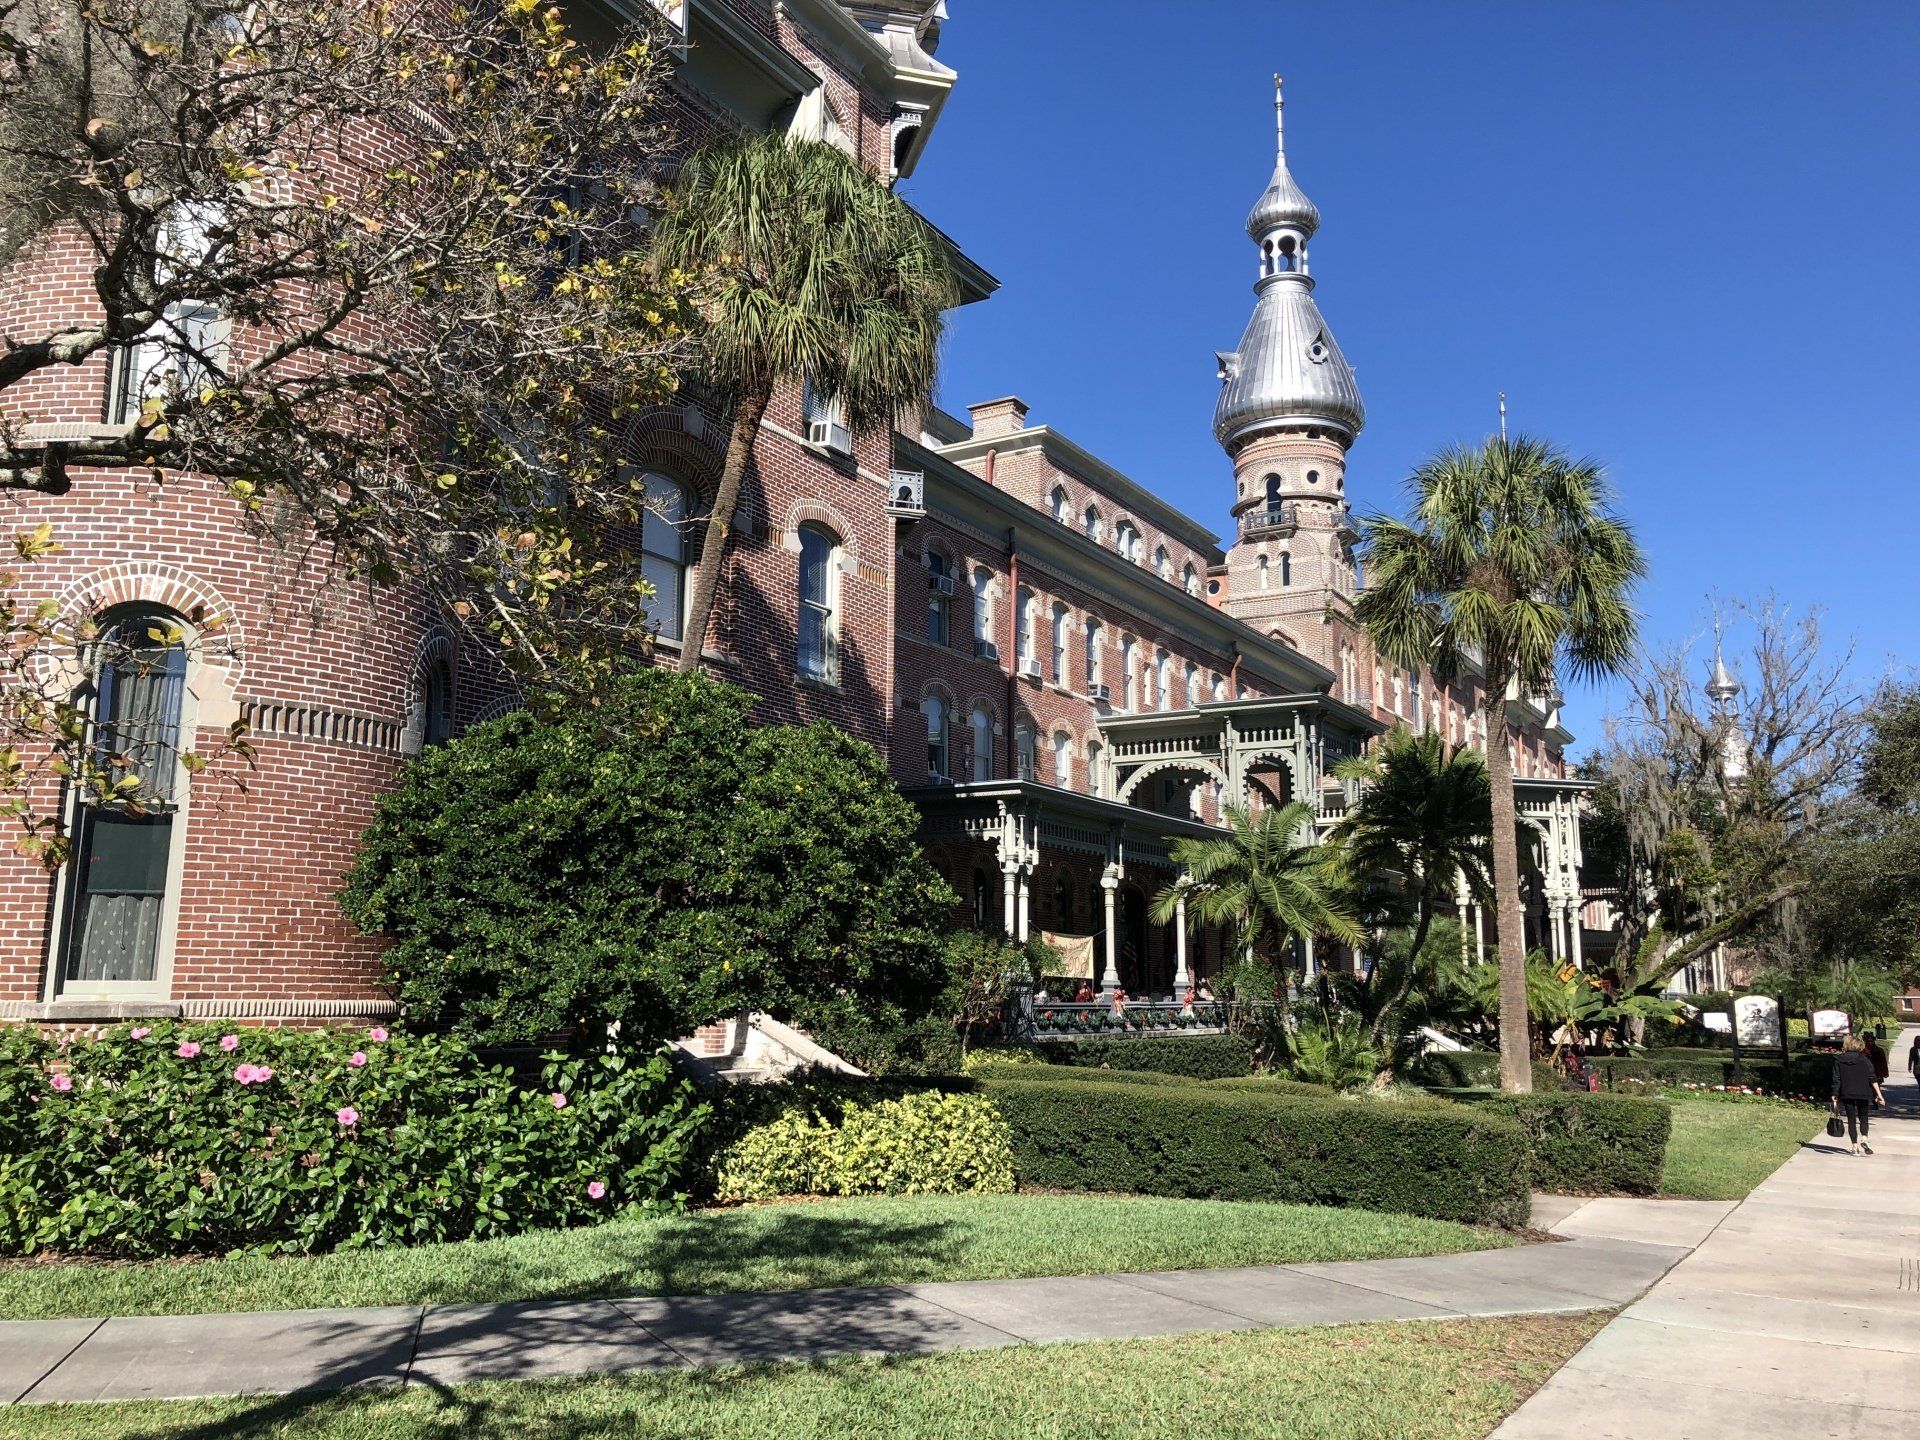 Henry B. Plant Museum at Tampa Bay Hotel on W. Kennedy Blvd